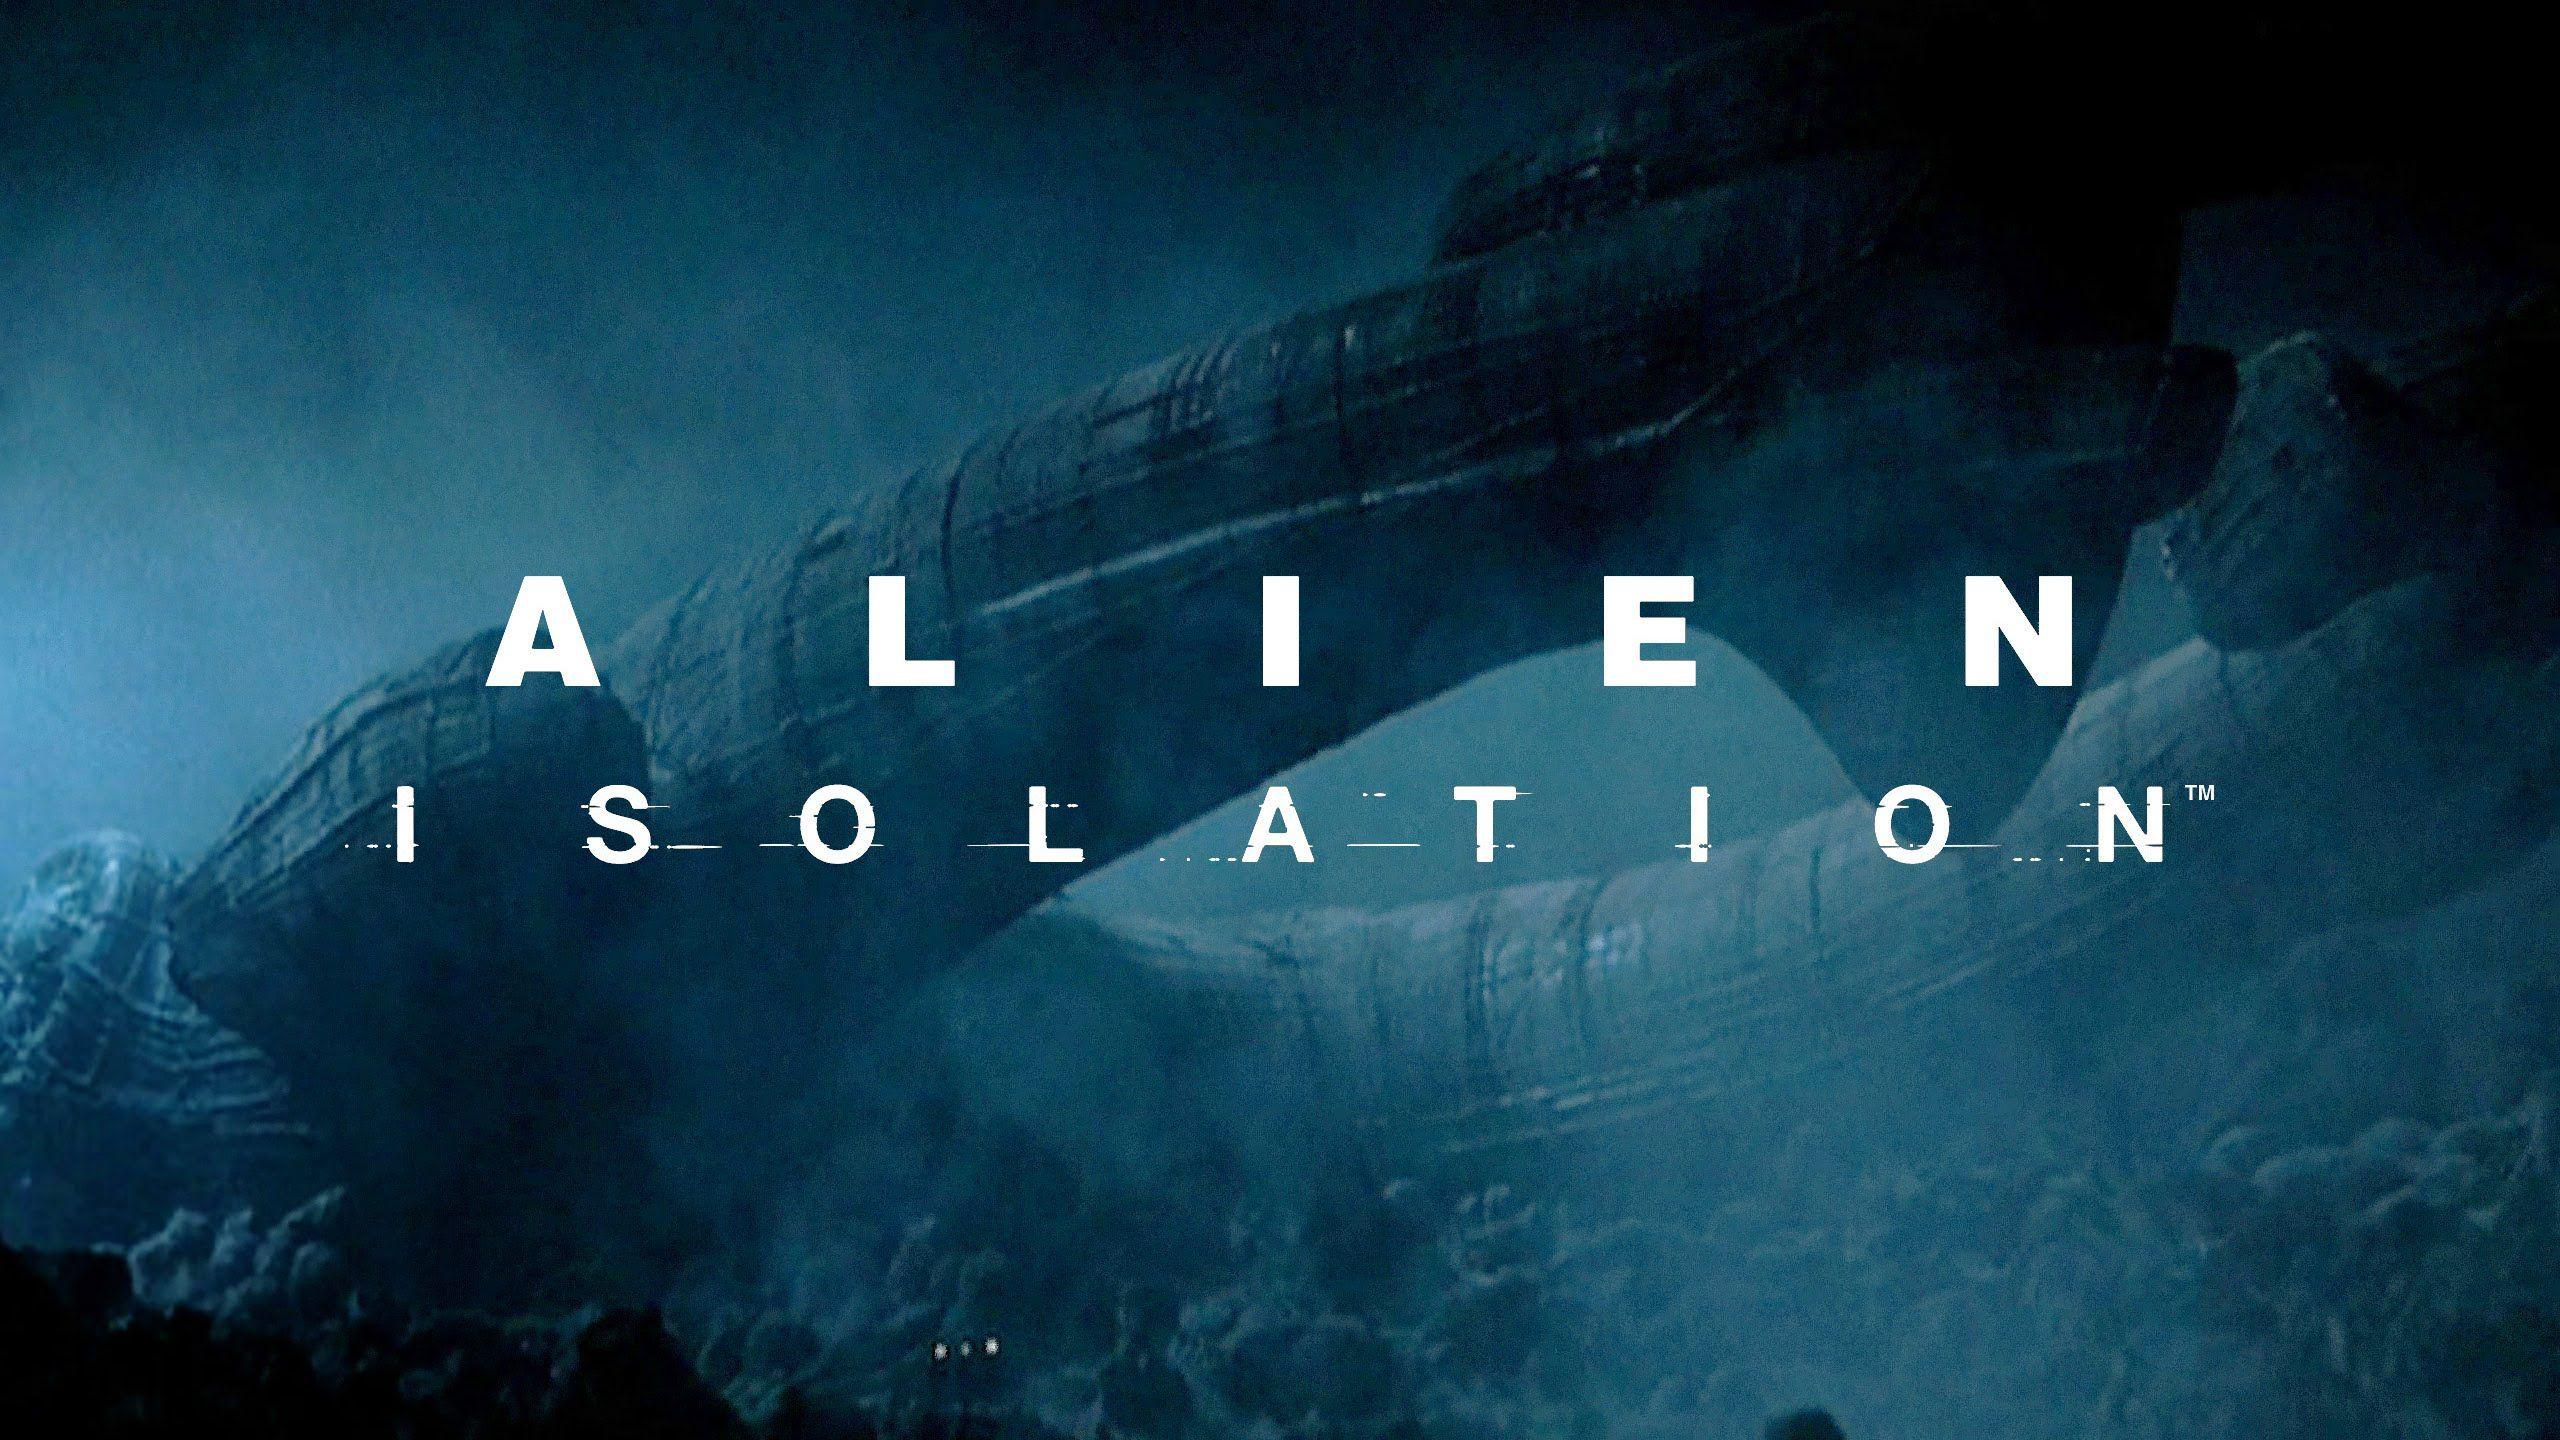 A L I E N: Isolation The Spaceship 2560x1440 Wallpaper